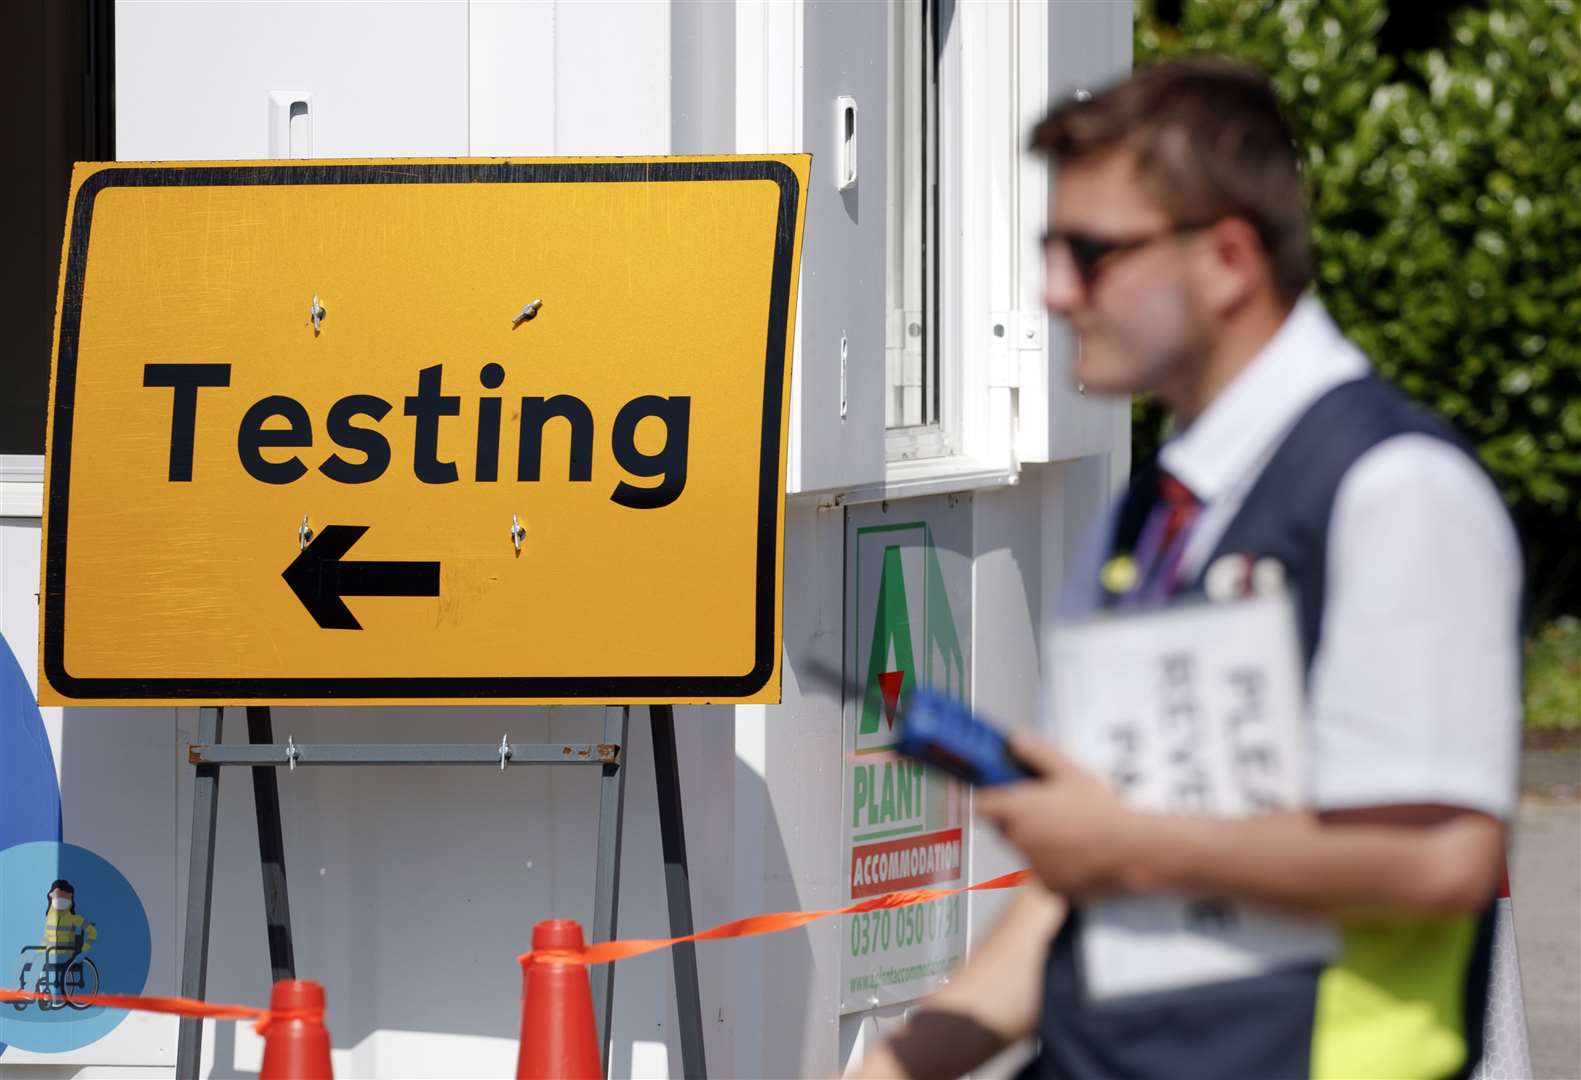 A testing centre at Bradford University in West Yorkshire (Danny Lawson/PA)